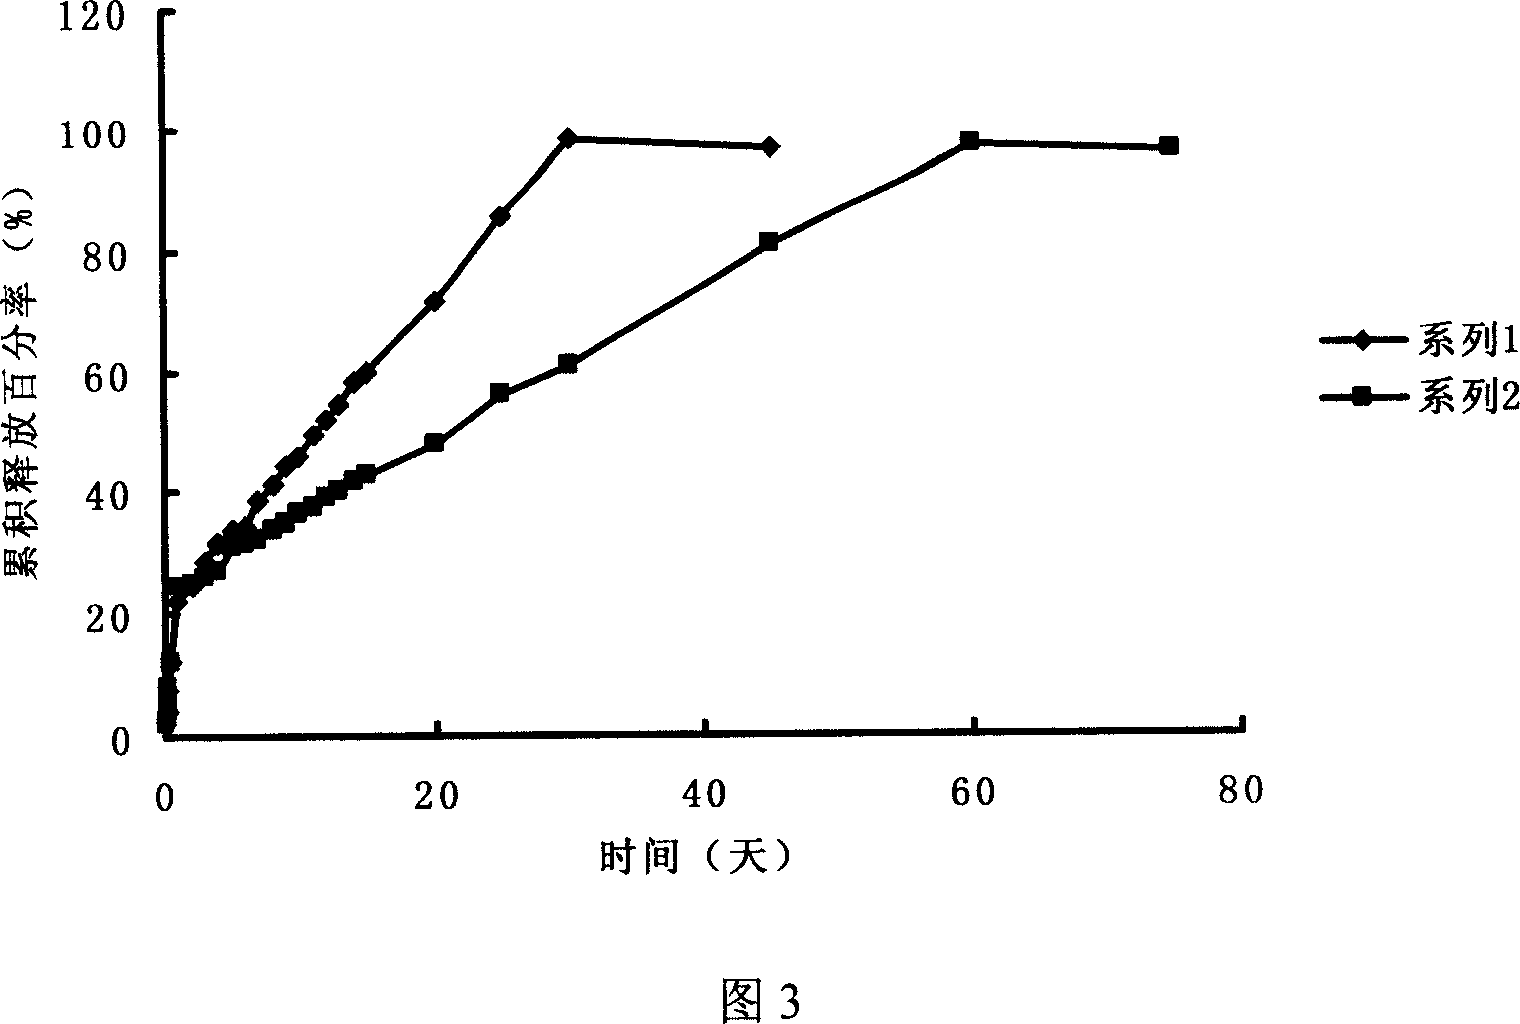 Intra-uterus administered medicinal stick of danazol and preparation process thereof